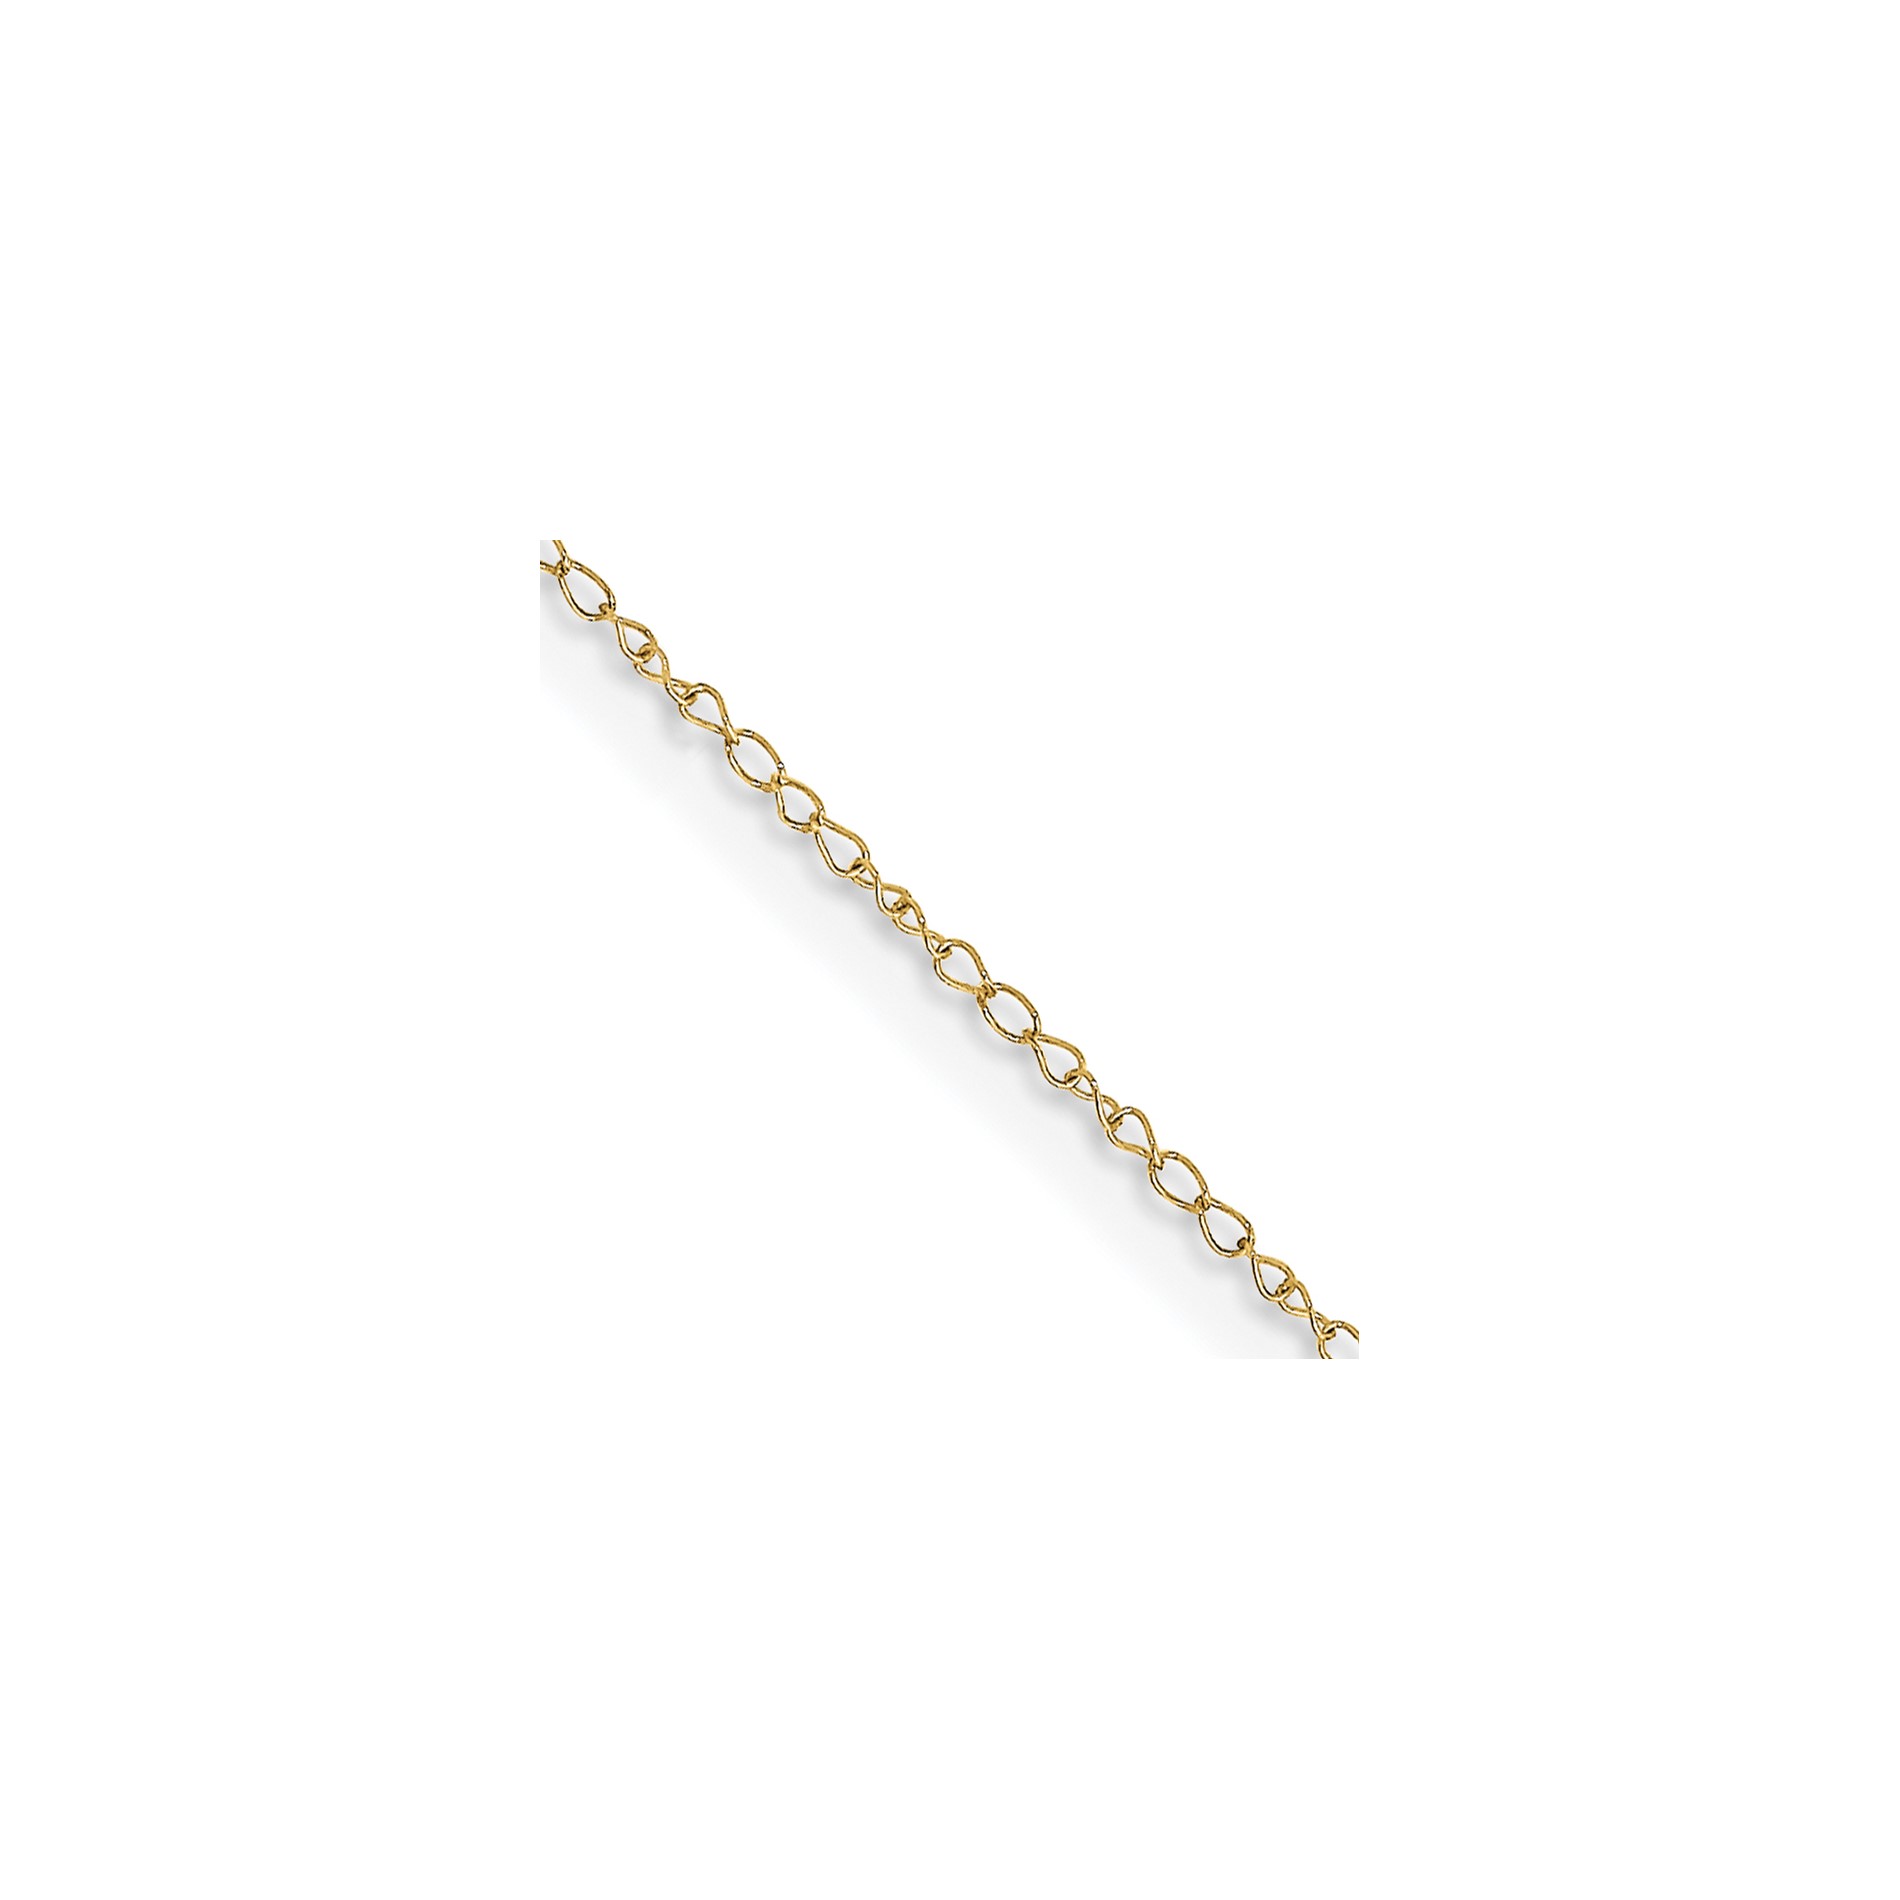 Diamond2Deal 10K Yellow Gold .42 mm Carded Curb Chain